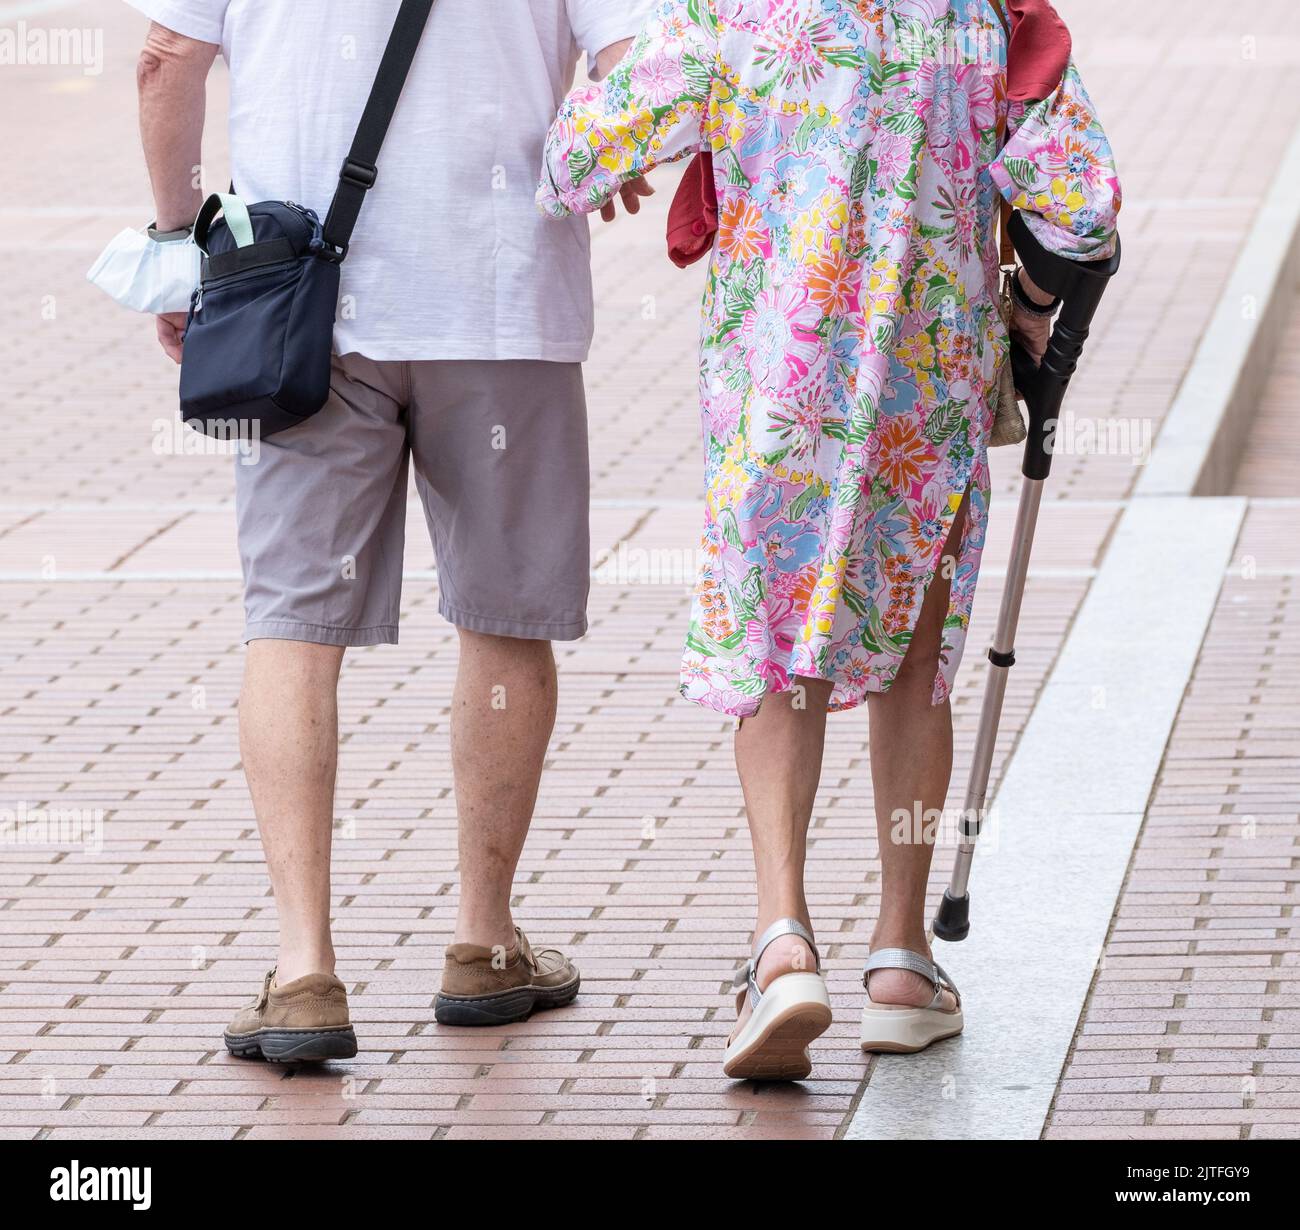 Rear view of elderly couple in Spain Stock Photo